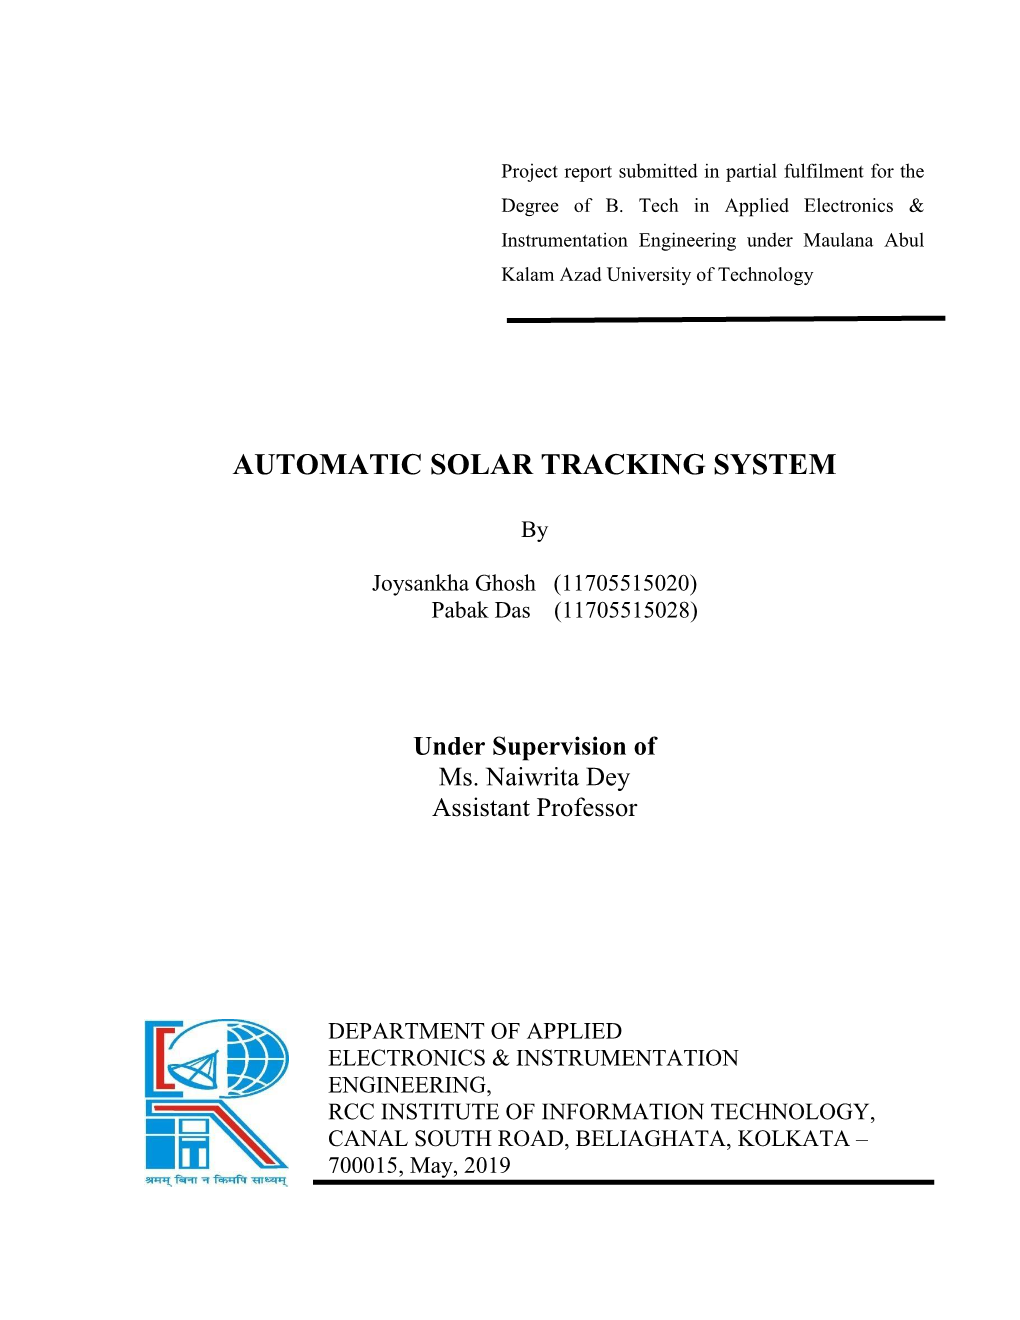 Automatic Solar Tracking System